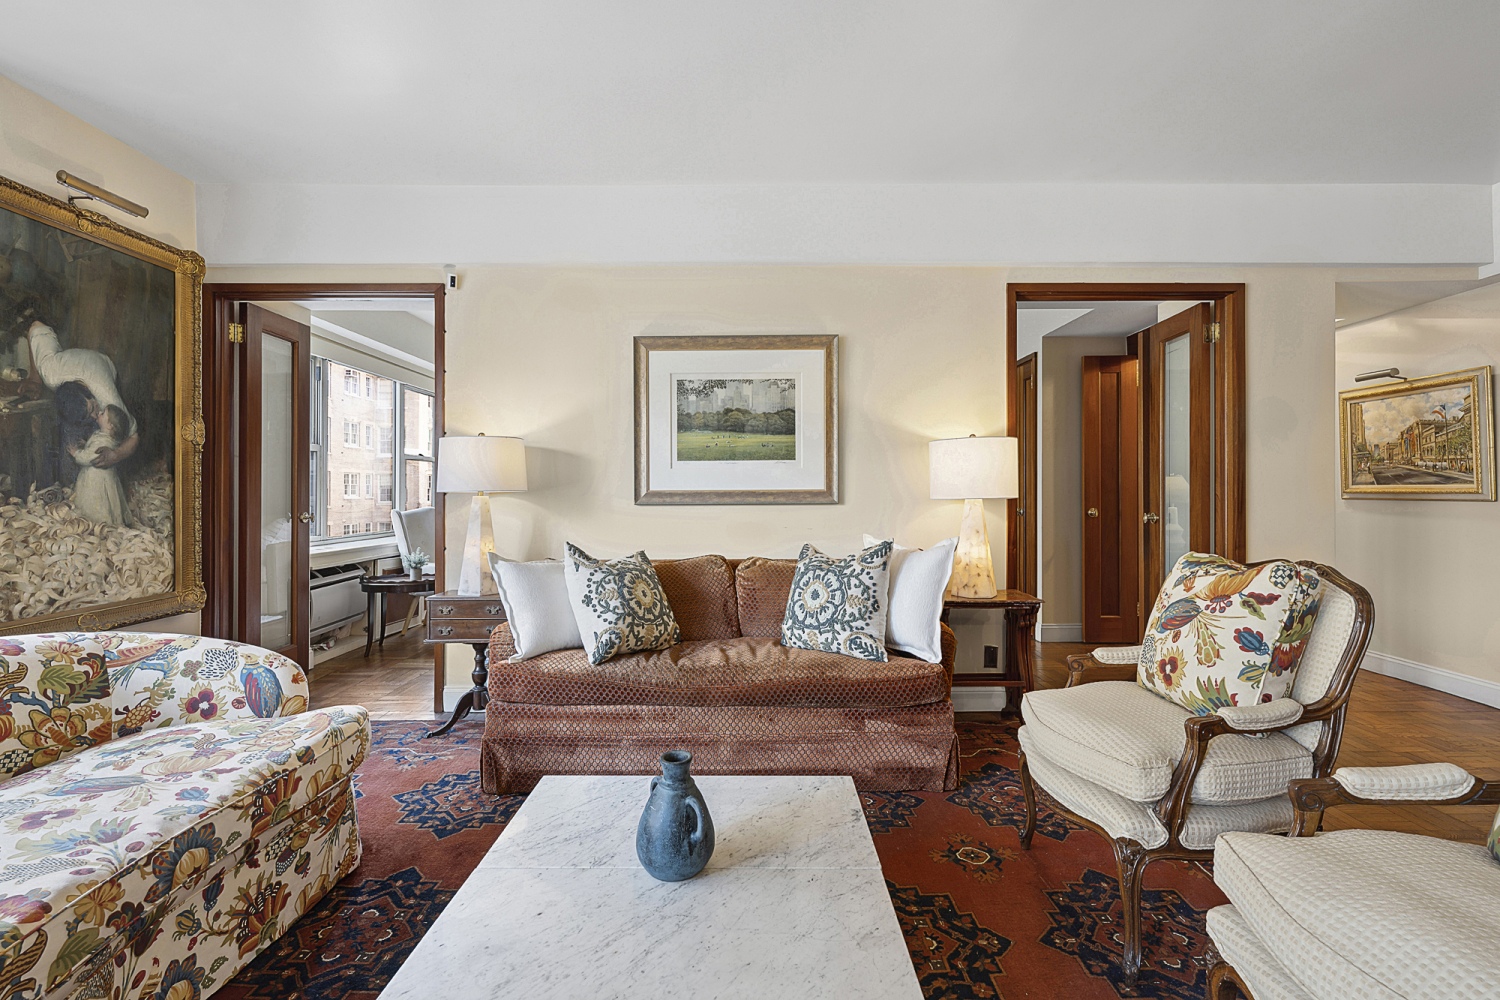 1025 5th Avenue 10Gn, Upper East Side, Upper East Side, NYC - 2 Bedrooms  
2 Bathrooms  
5 Rooms - 